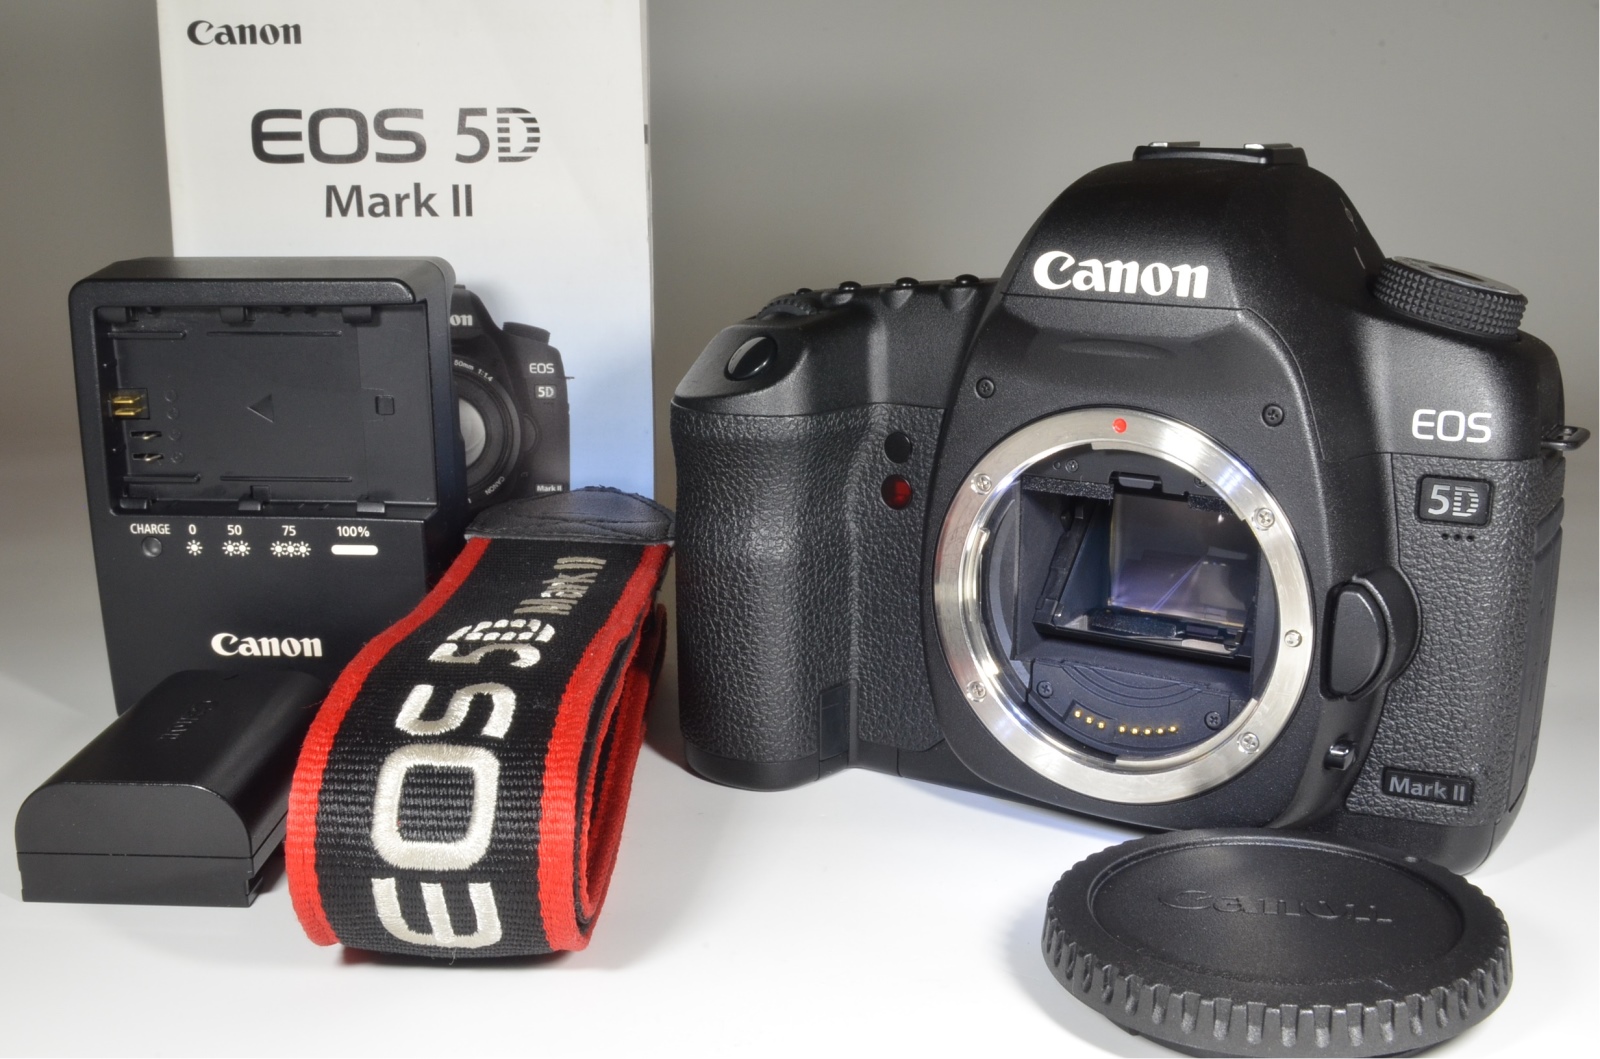 CANON EOS 5D Mark II with EF 28-135mm f3.5-5.6 IS USM #a0337 